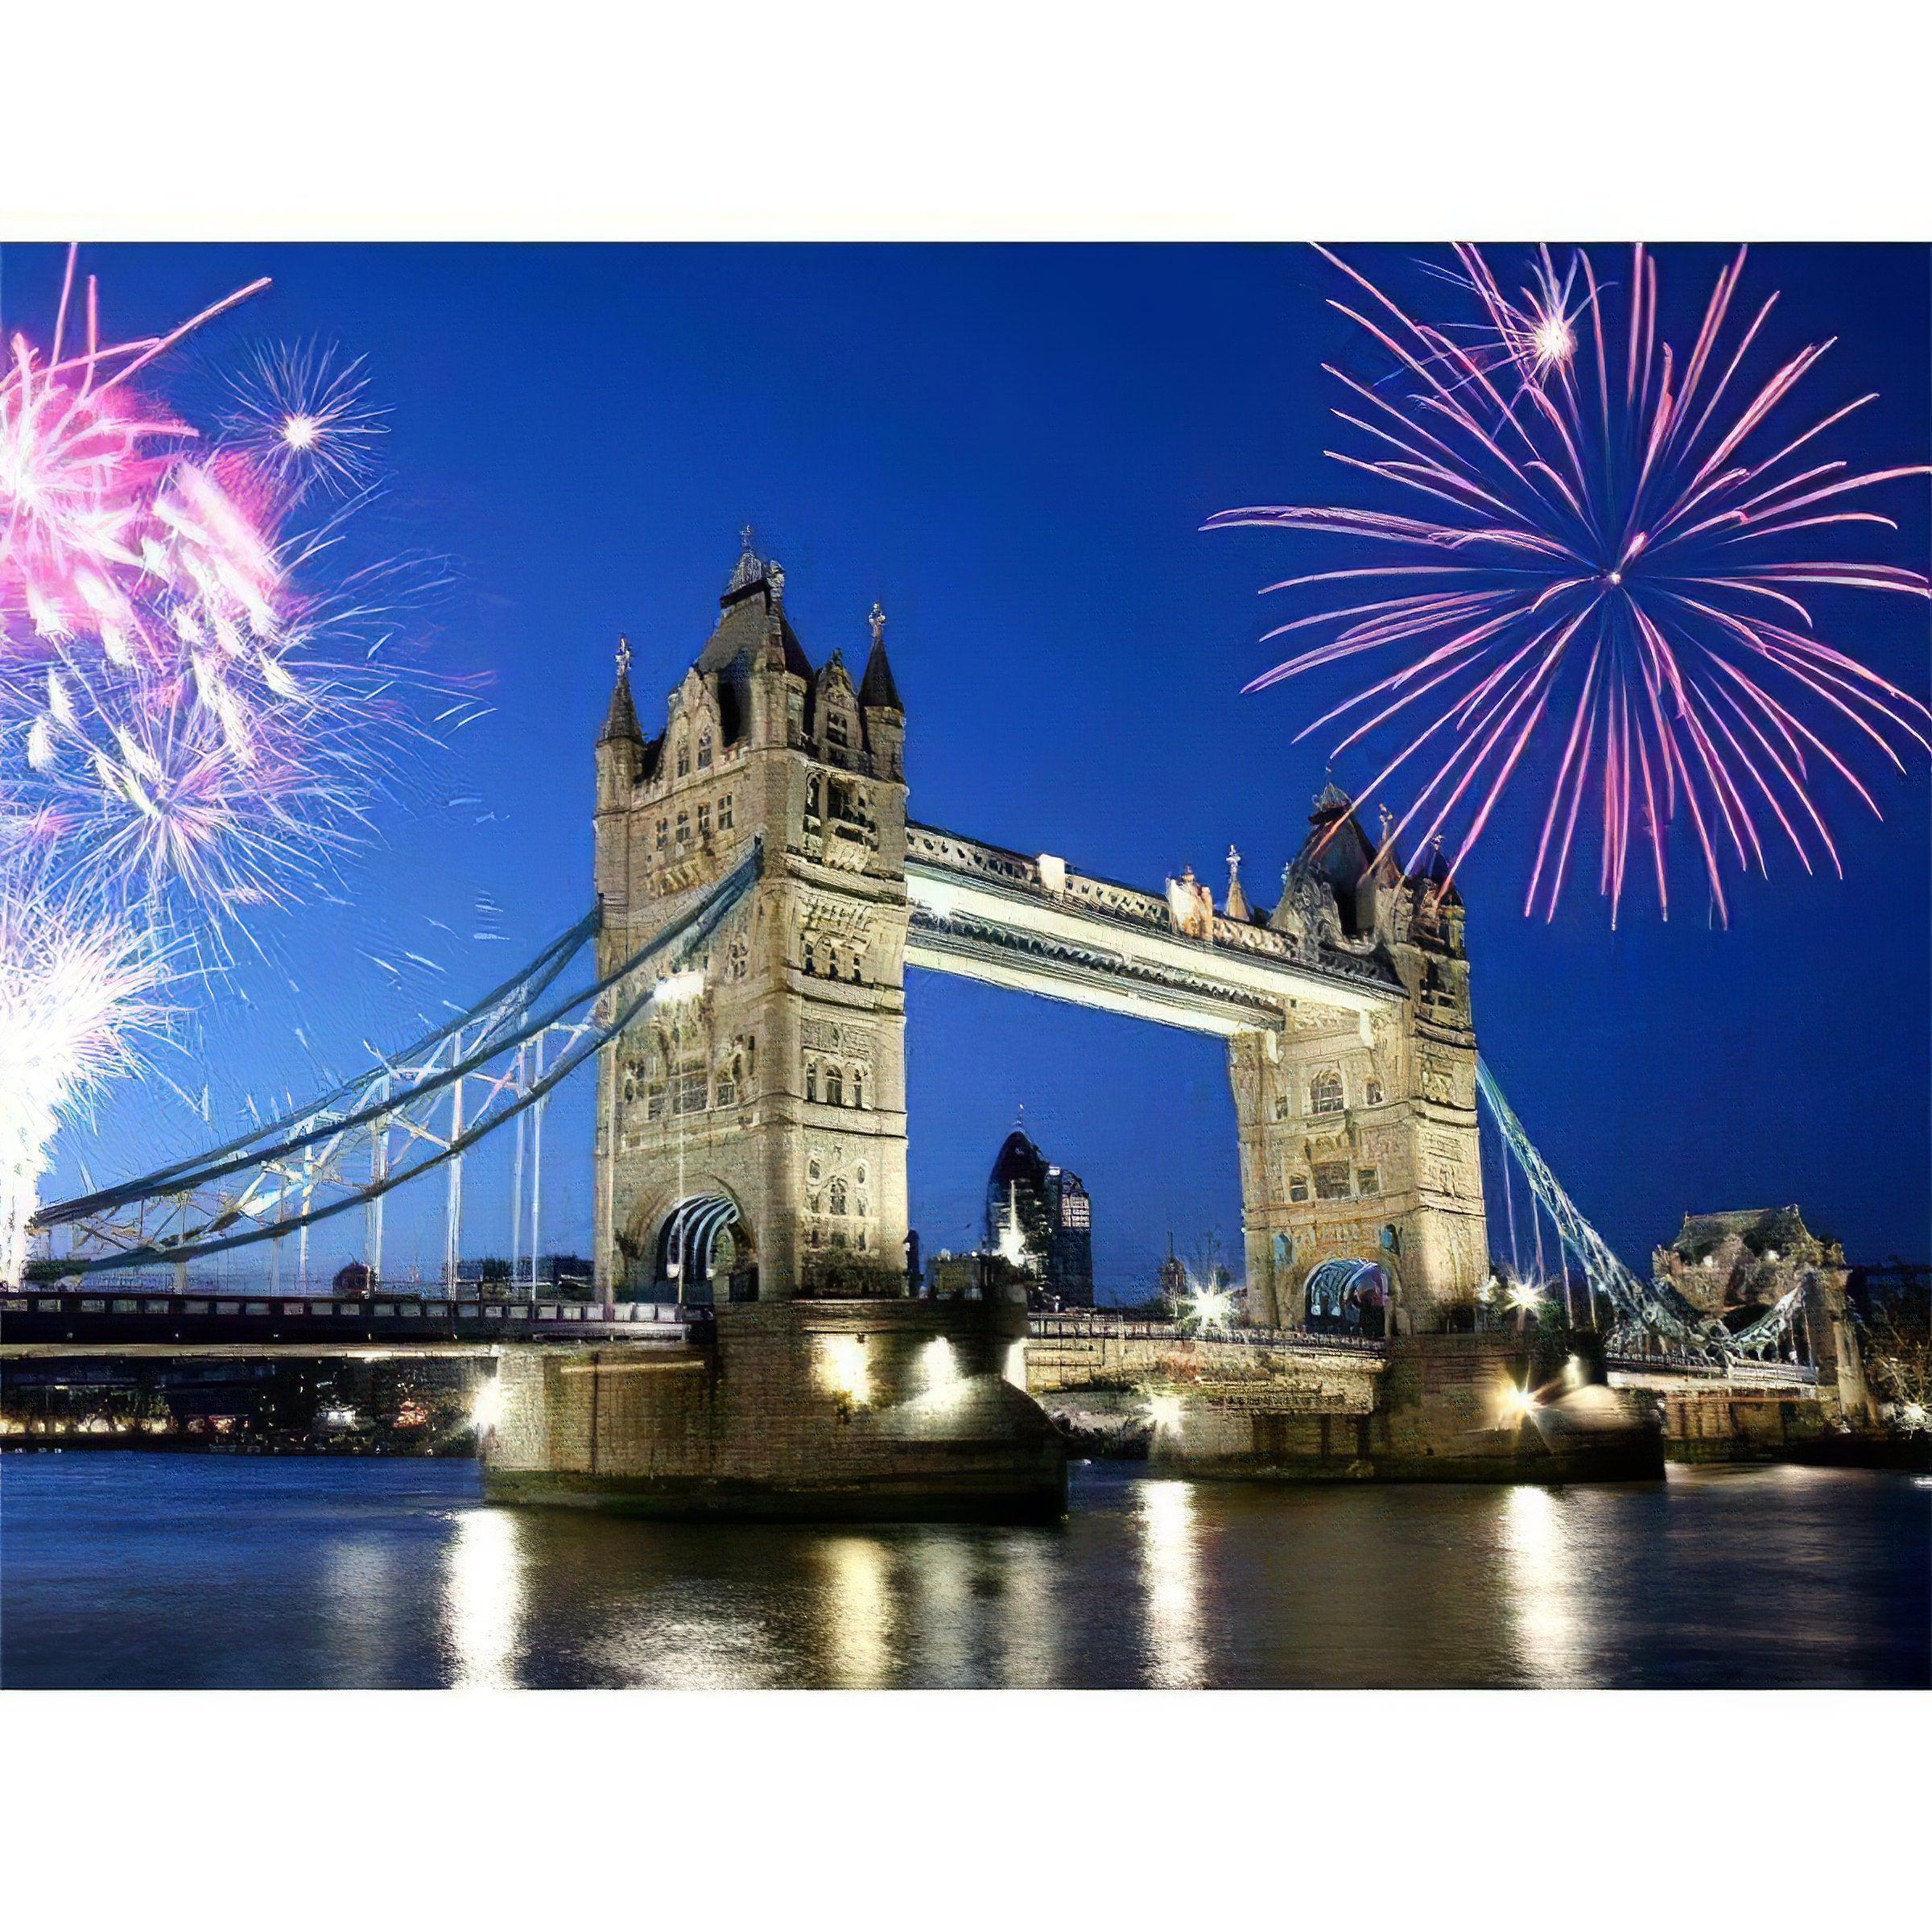 Marvel at fireworks dazzling over a city bridge, a blend of beauty and engineering.City Bridge And Fireworks - Diamondartlove